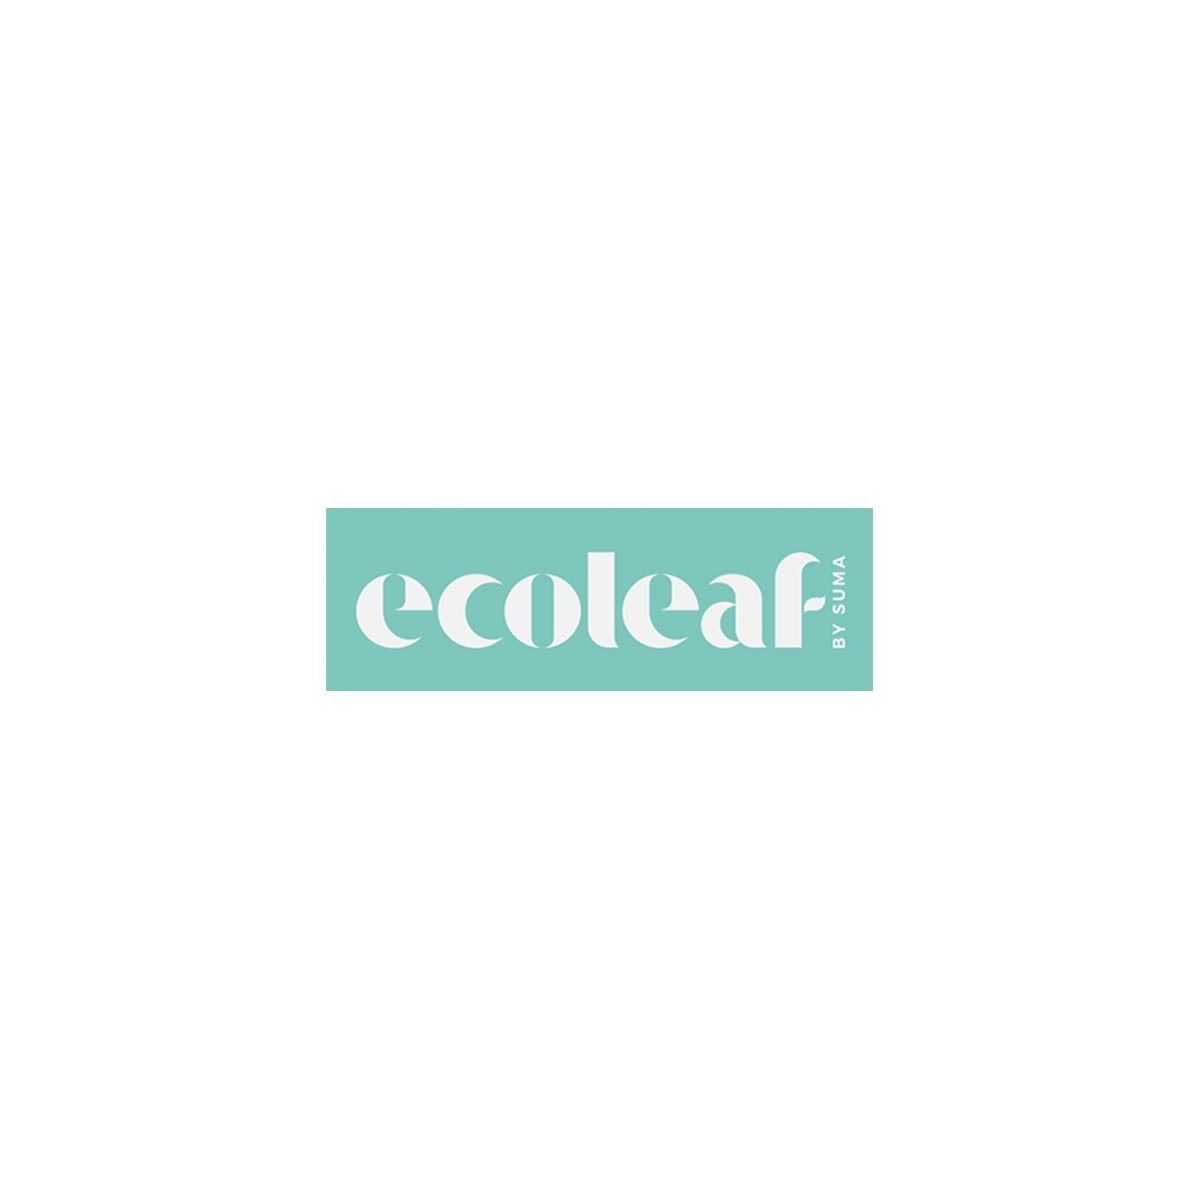 Where to buy Ecoleaf Products